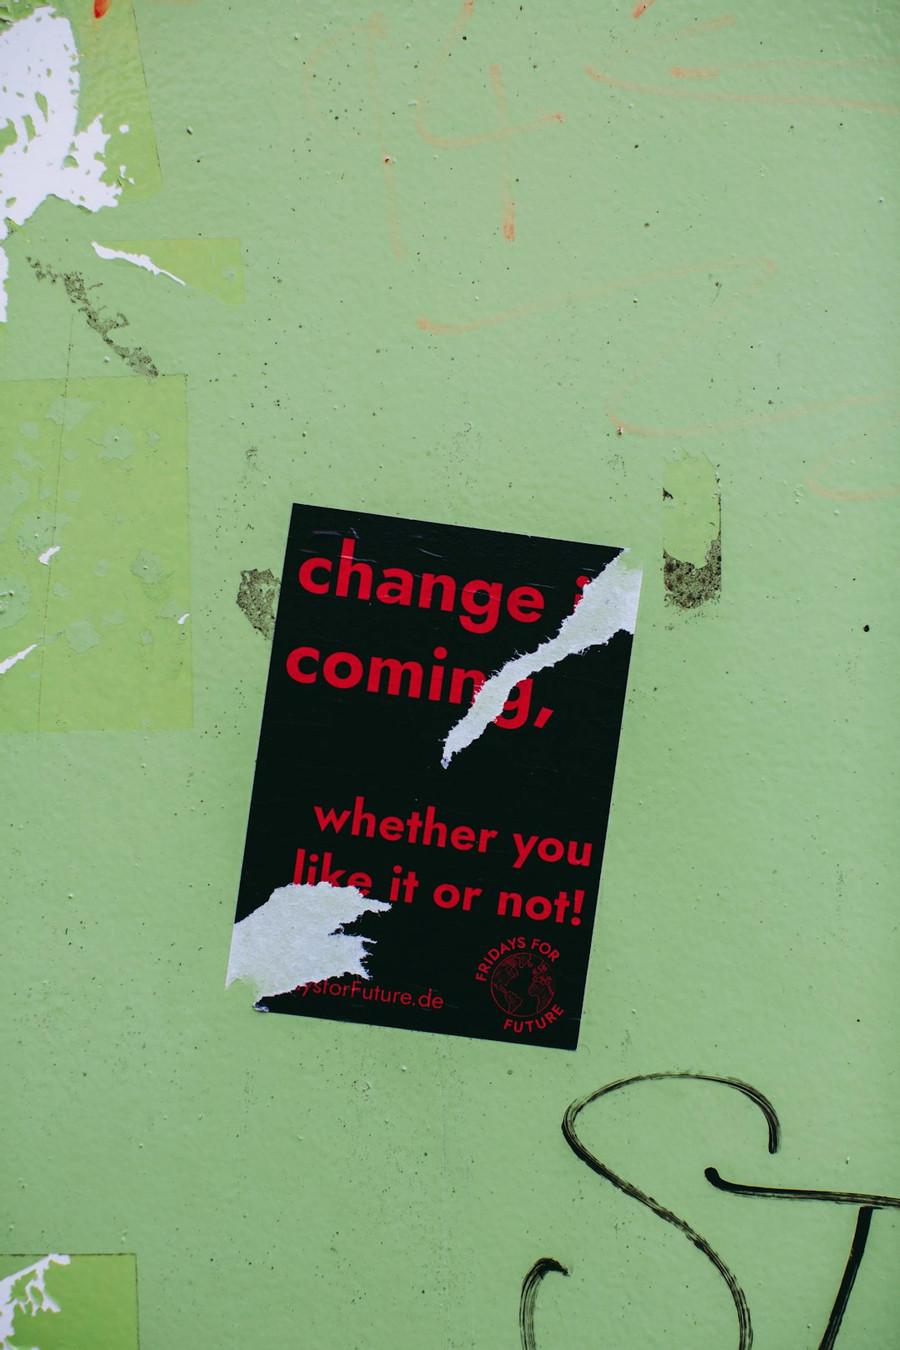 What Happens with Change?